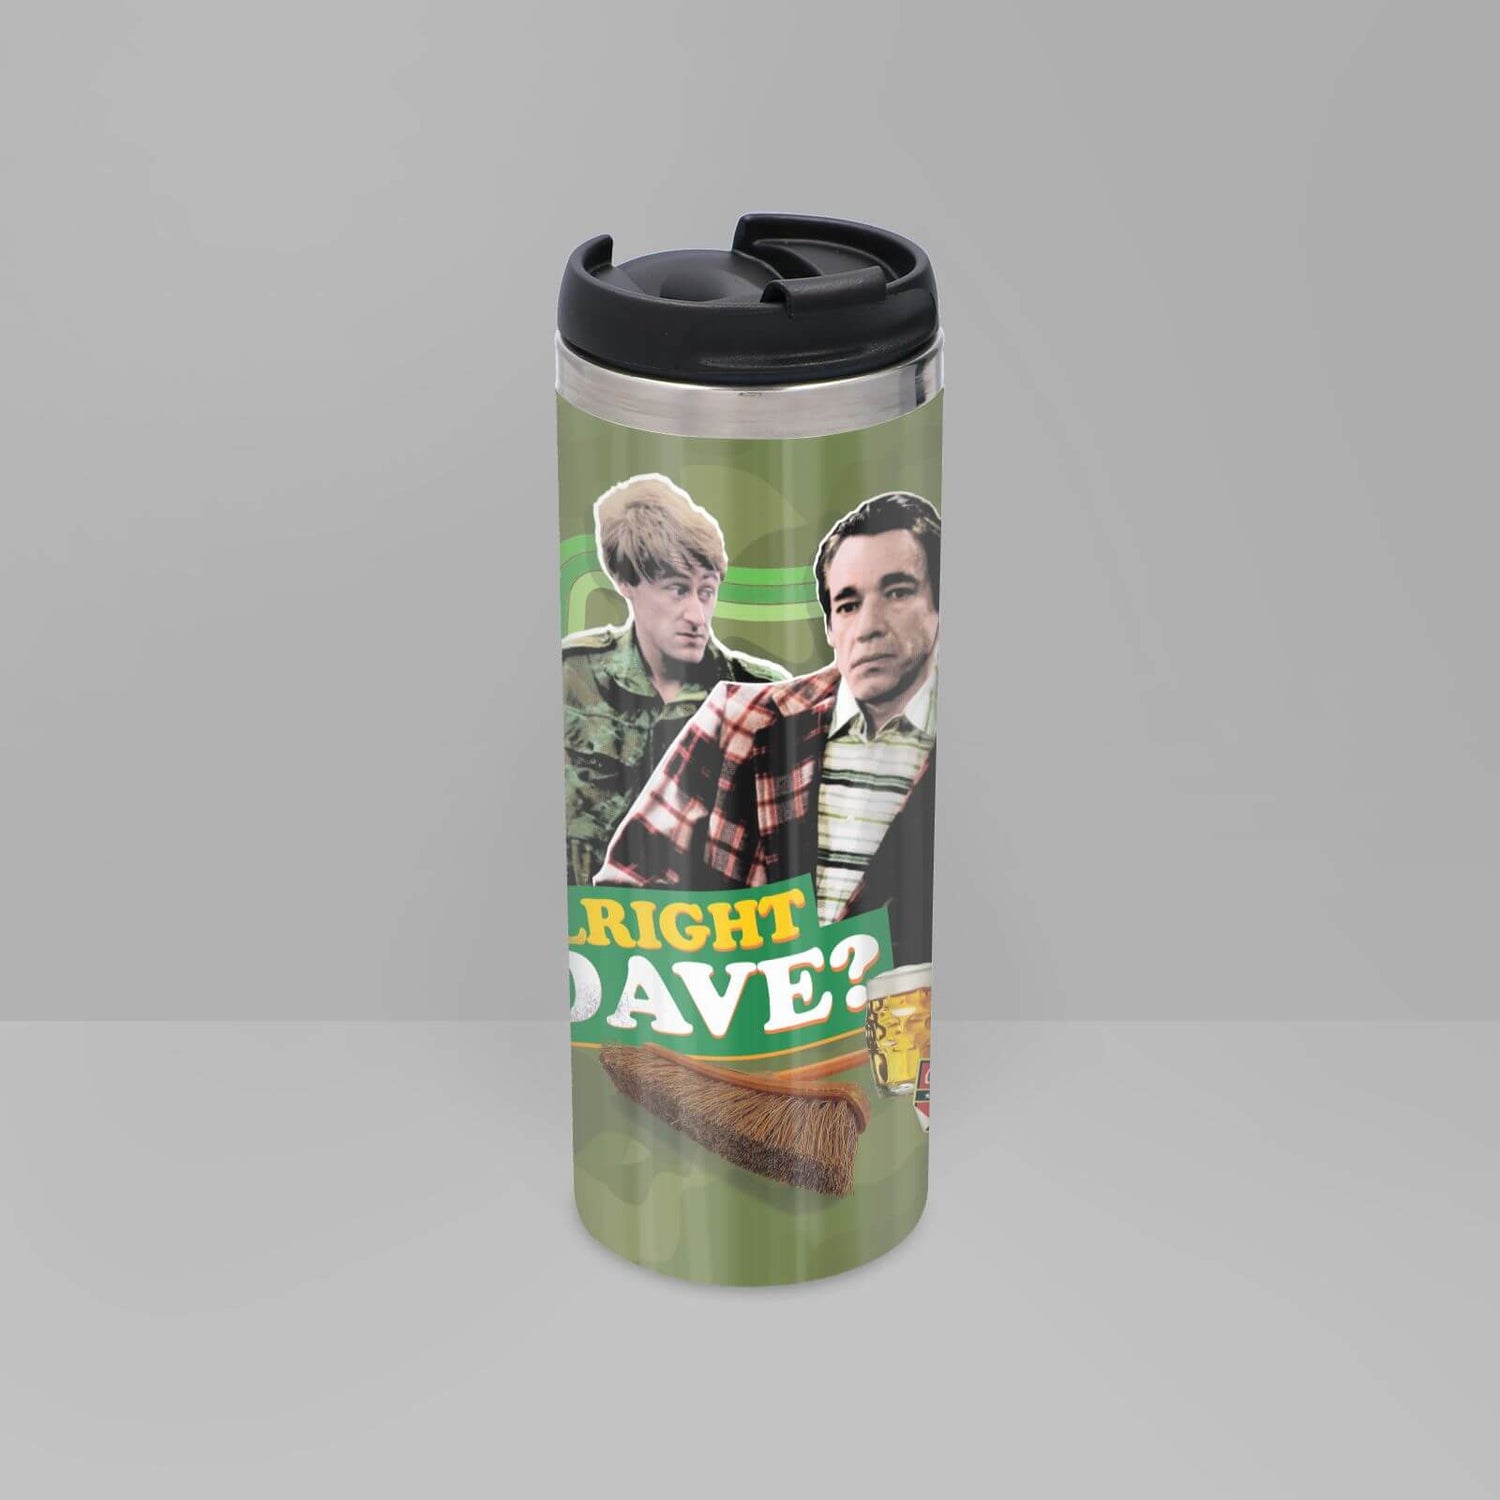 Only Fools And Horses Alright Dave? Stainless Steel Thermo Travel Mug